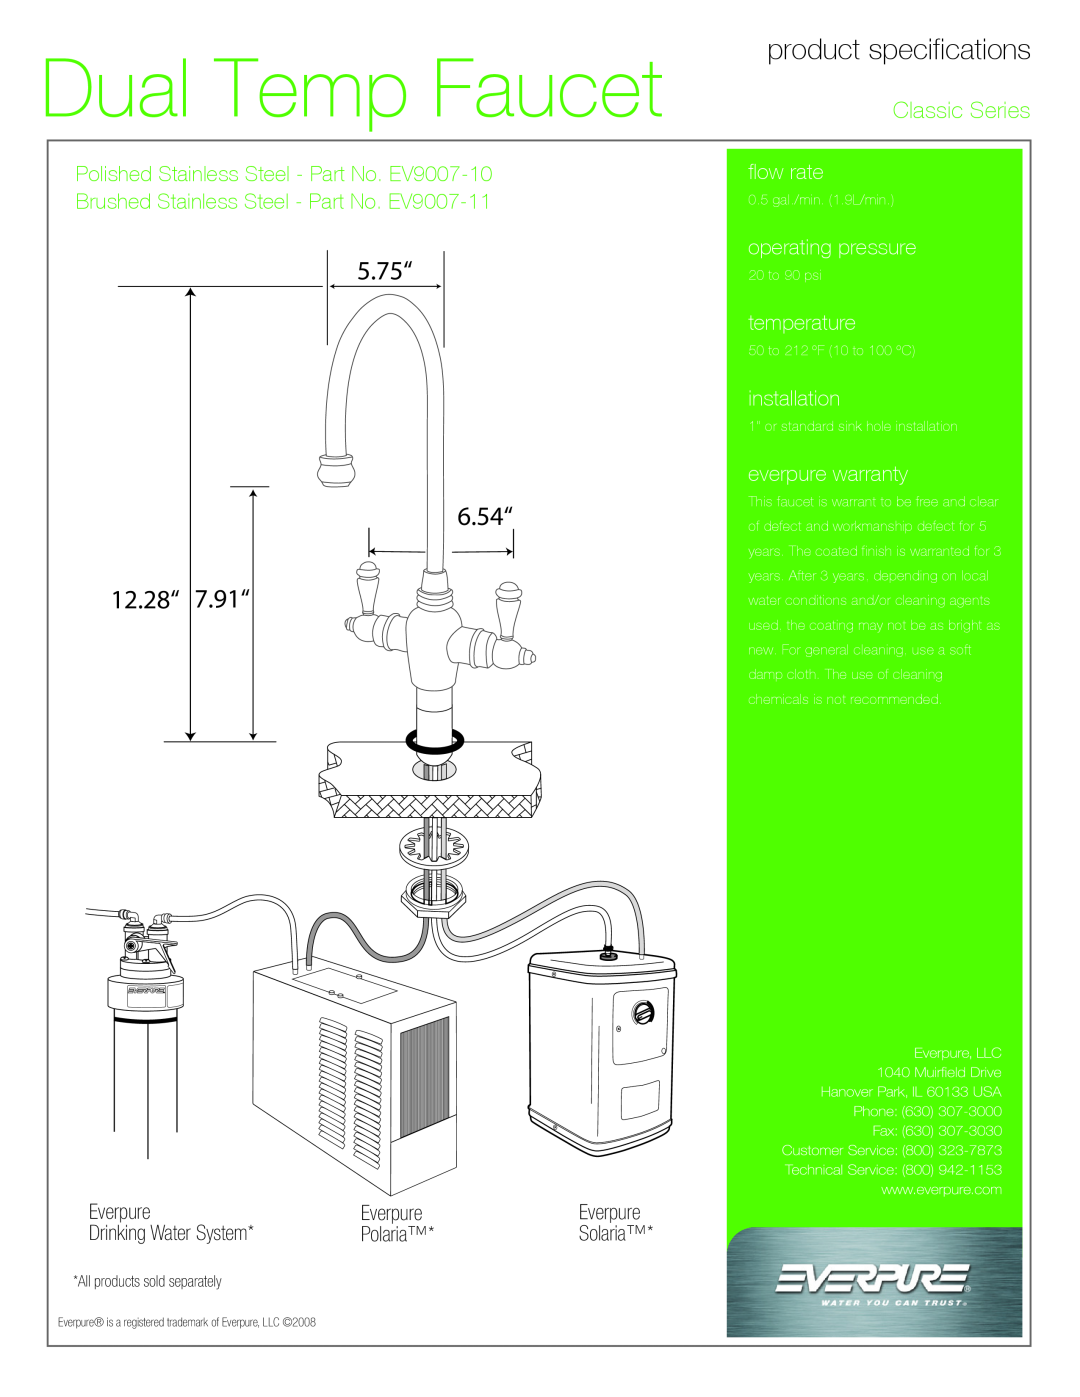 Everpure EV9007-10 Everpure, Drinking Water System, Polaria, Dual Temp Faucet, product specifications, Classic Series 